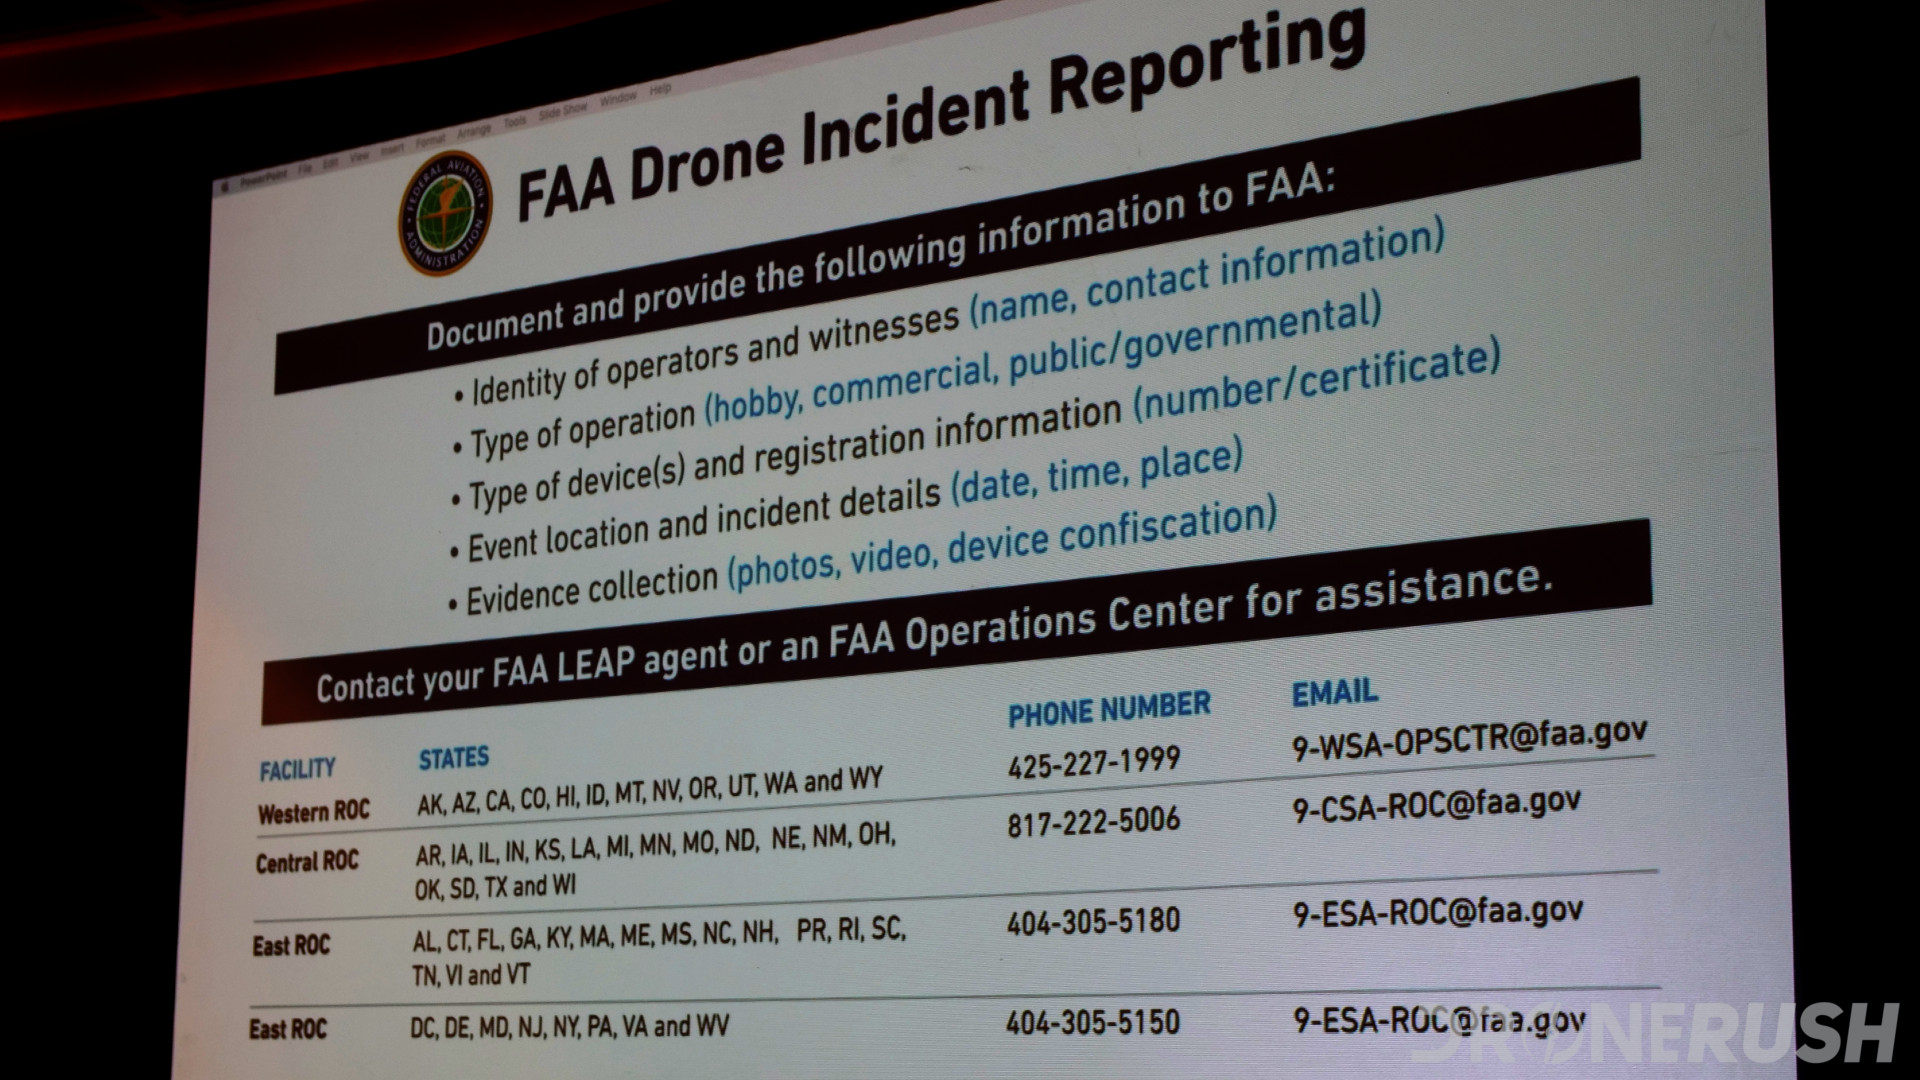 Interdrone 2019 FAA drone incident reporting